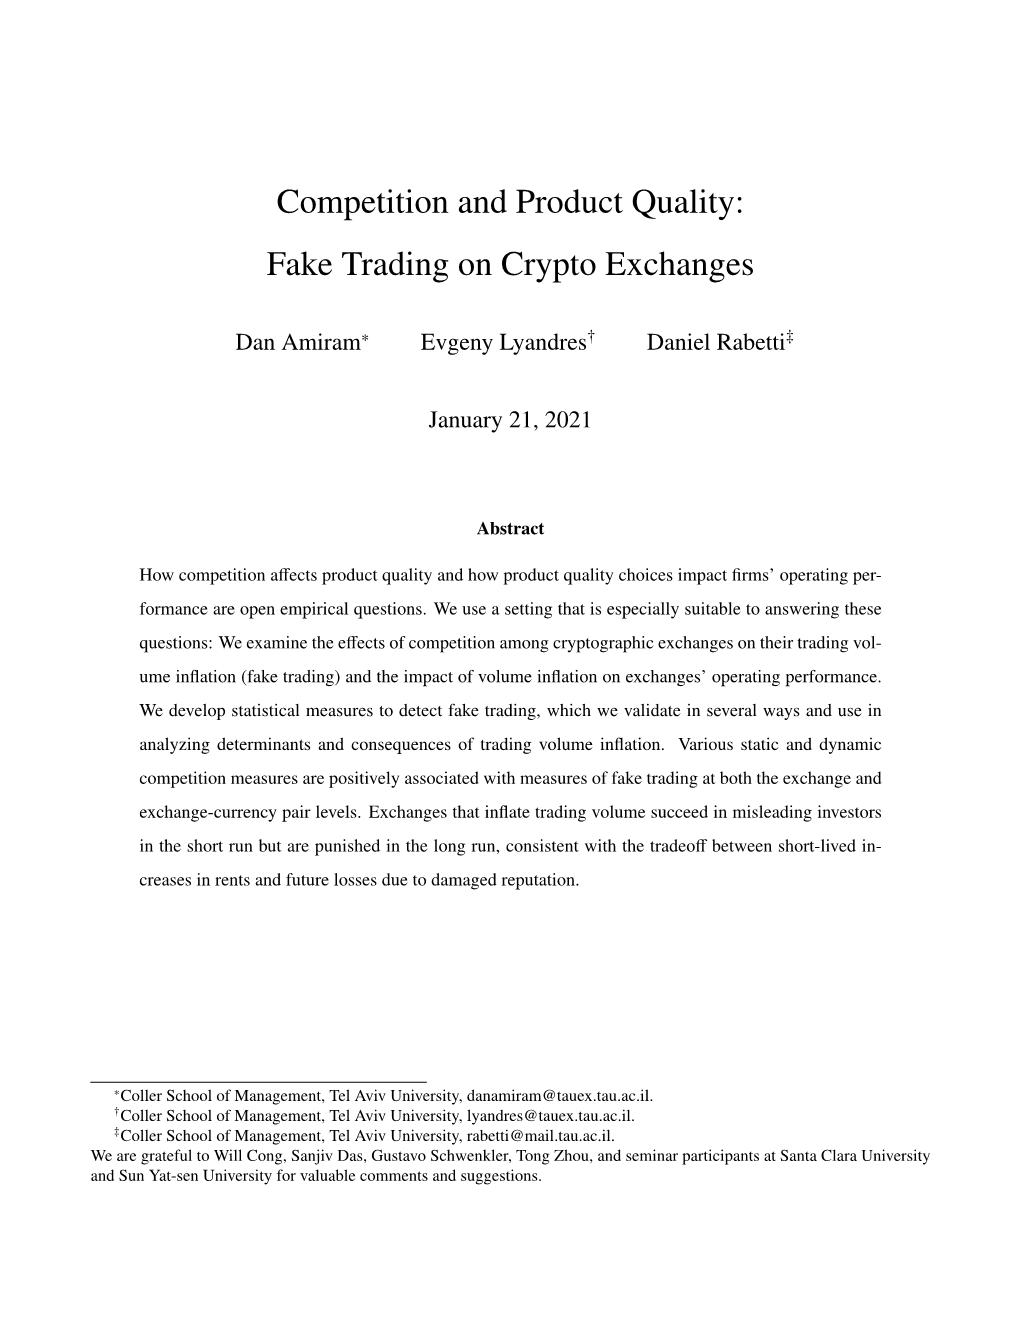 Competition and Product Quality: Fake Trading on Crypto Exchanges